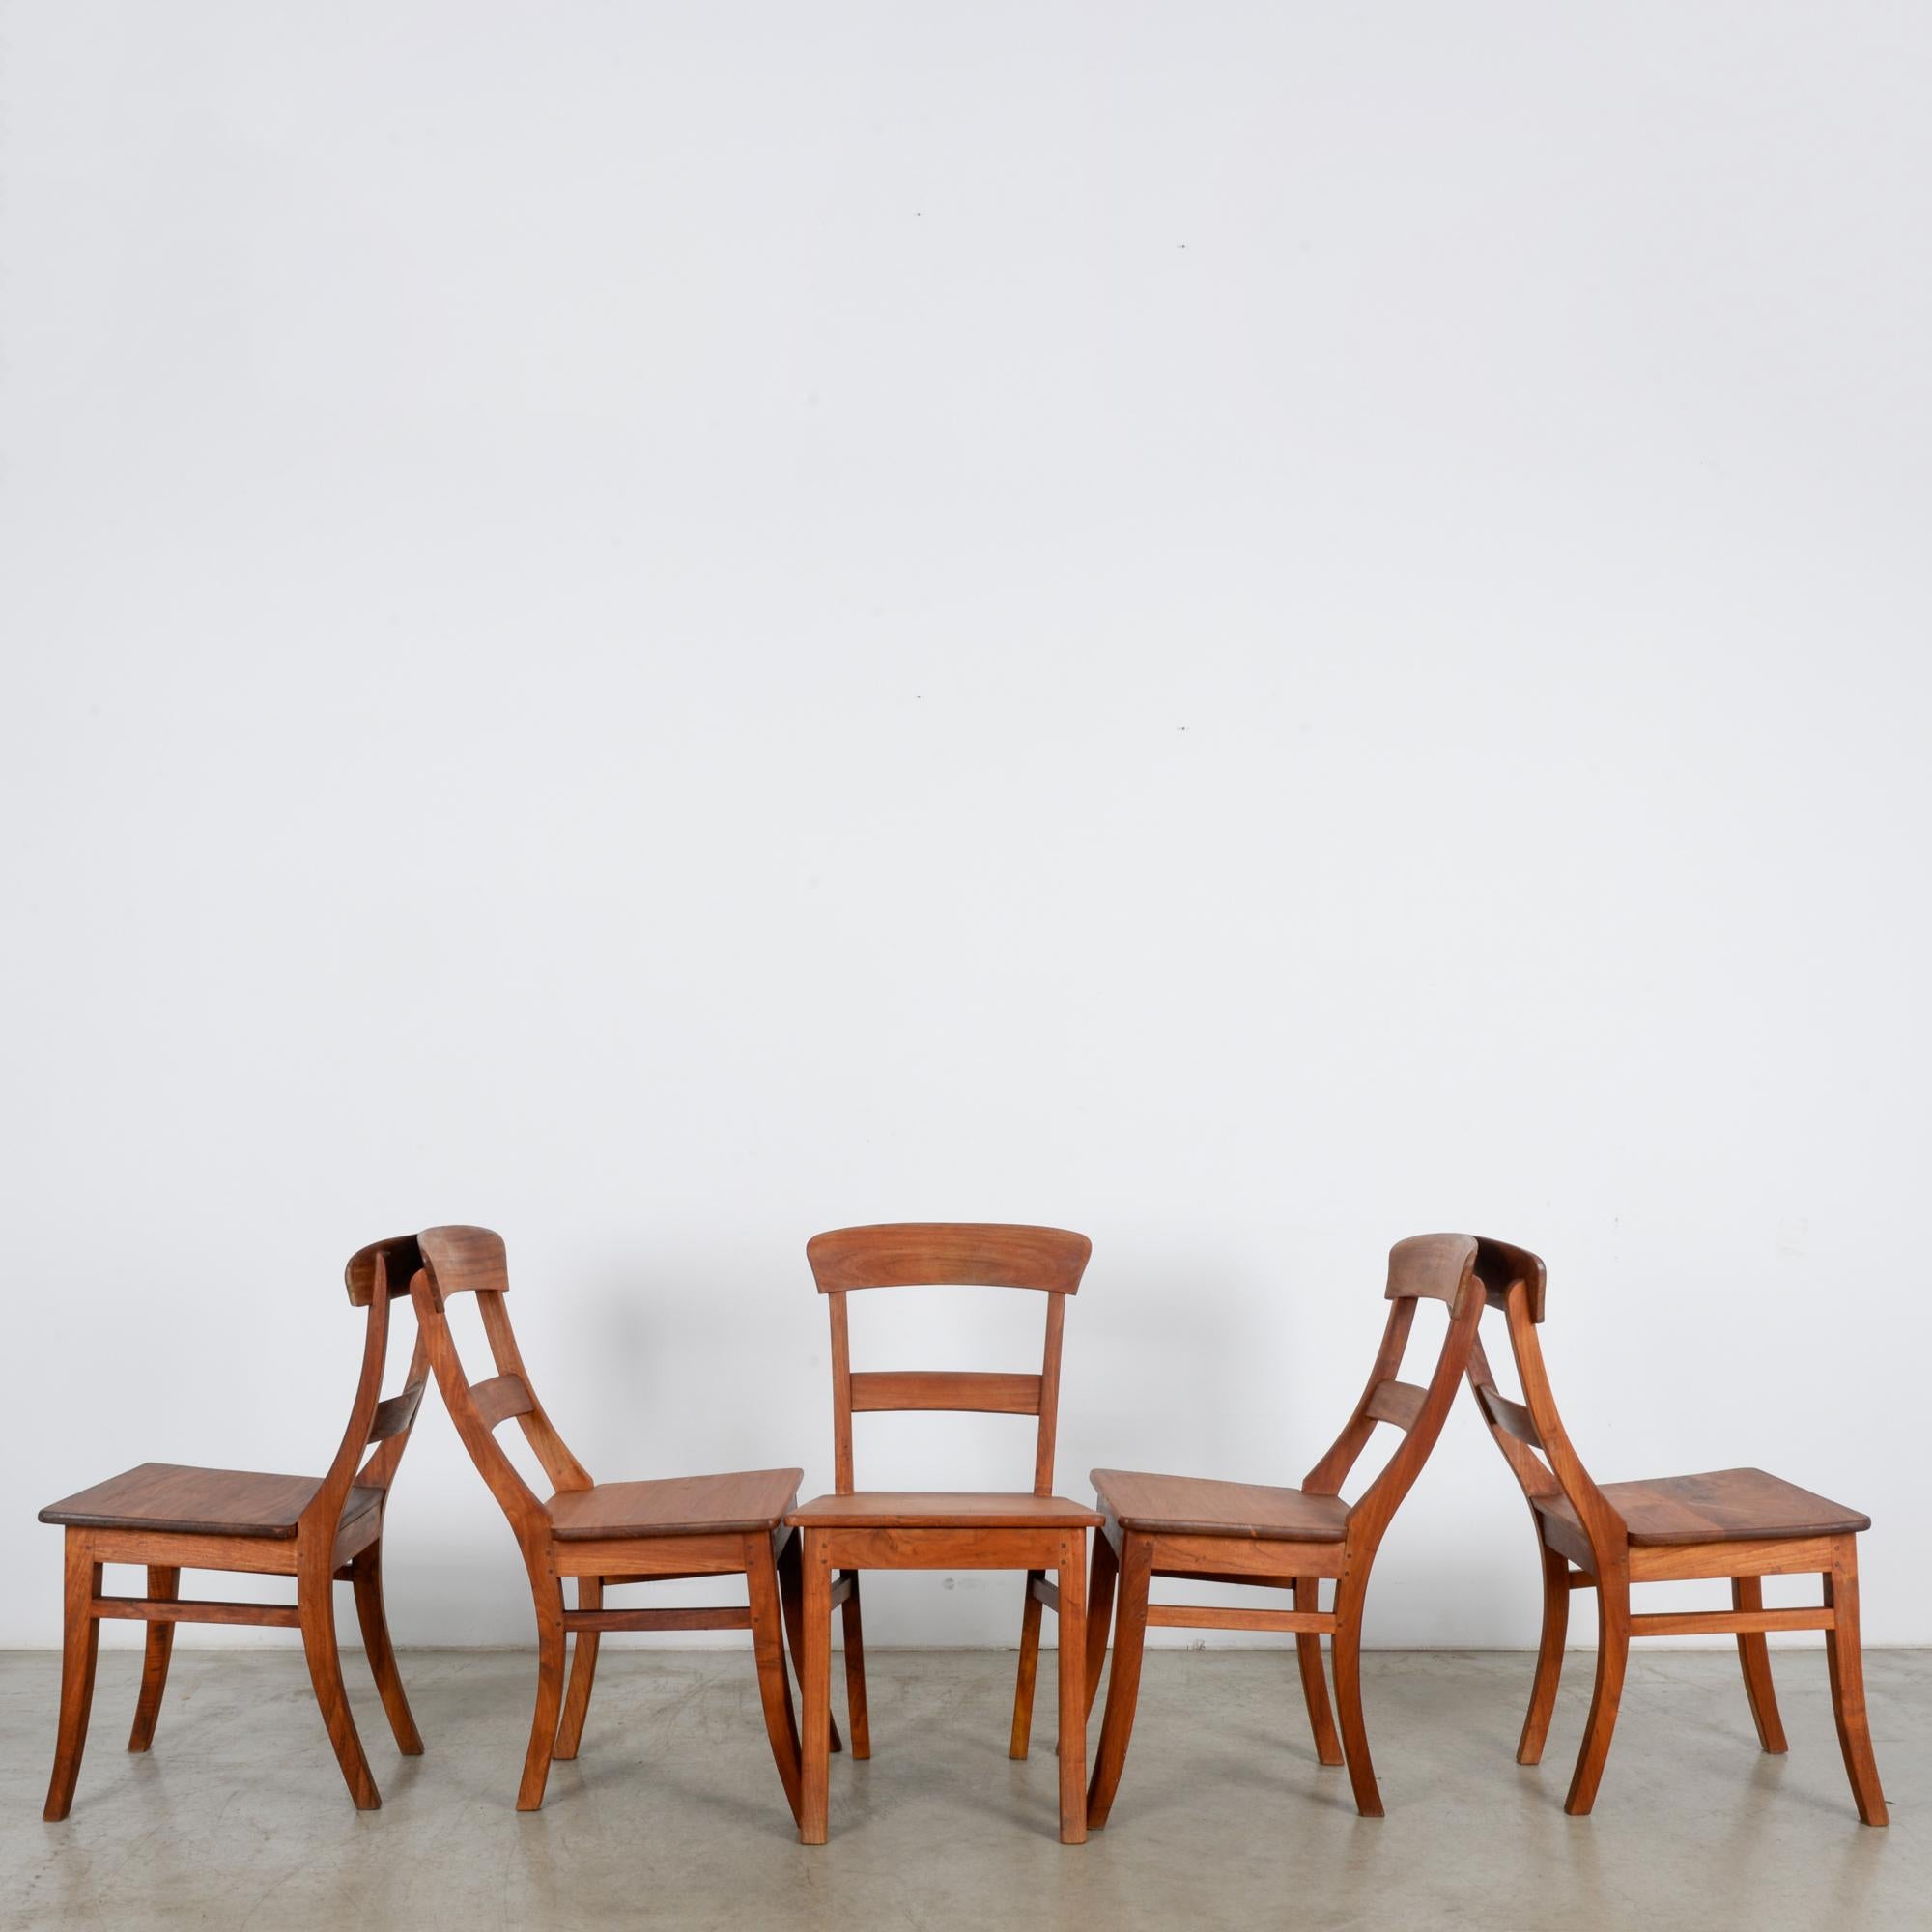 20th Century Rustic European Dining Chairs, Set of Five